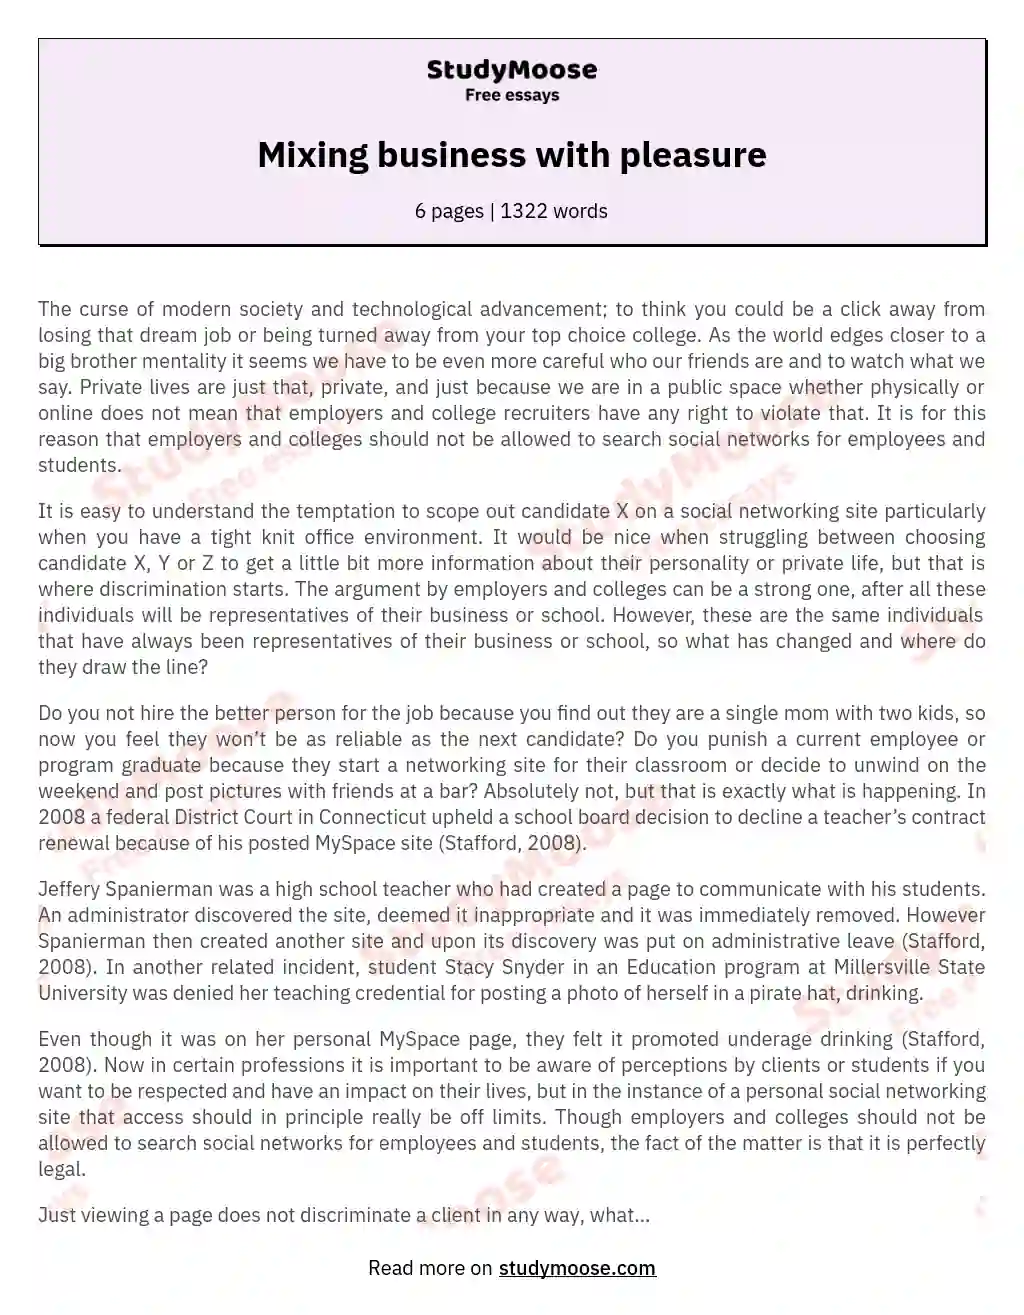 Mixing business with pleasure essay